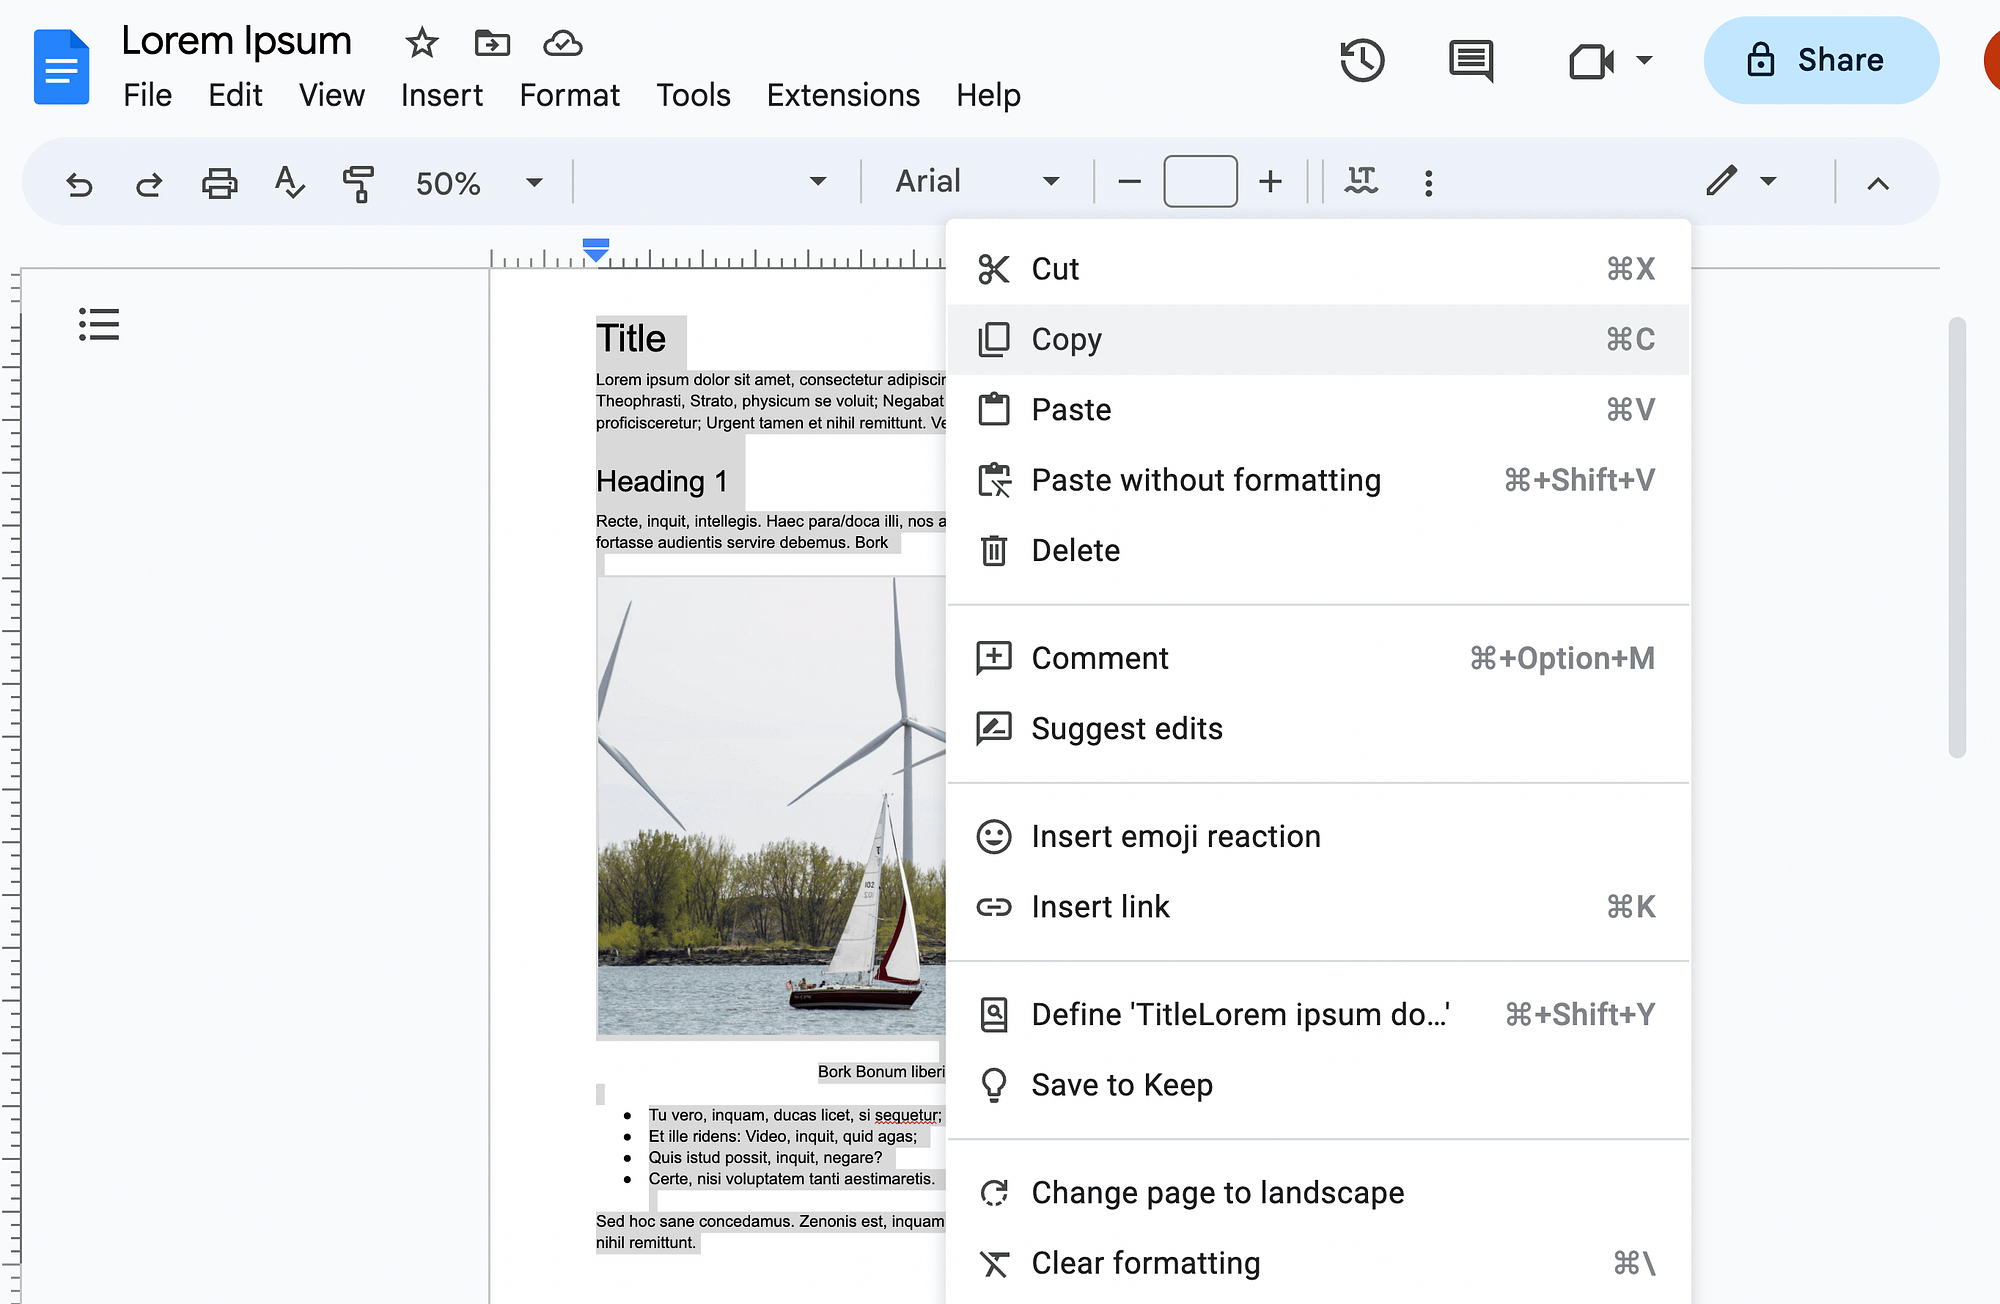 Copying content in a Google Doc.